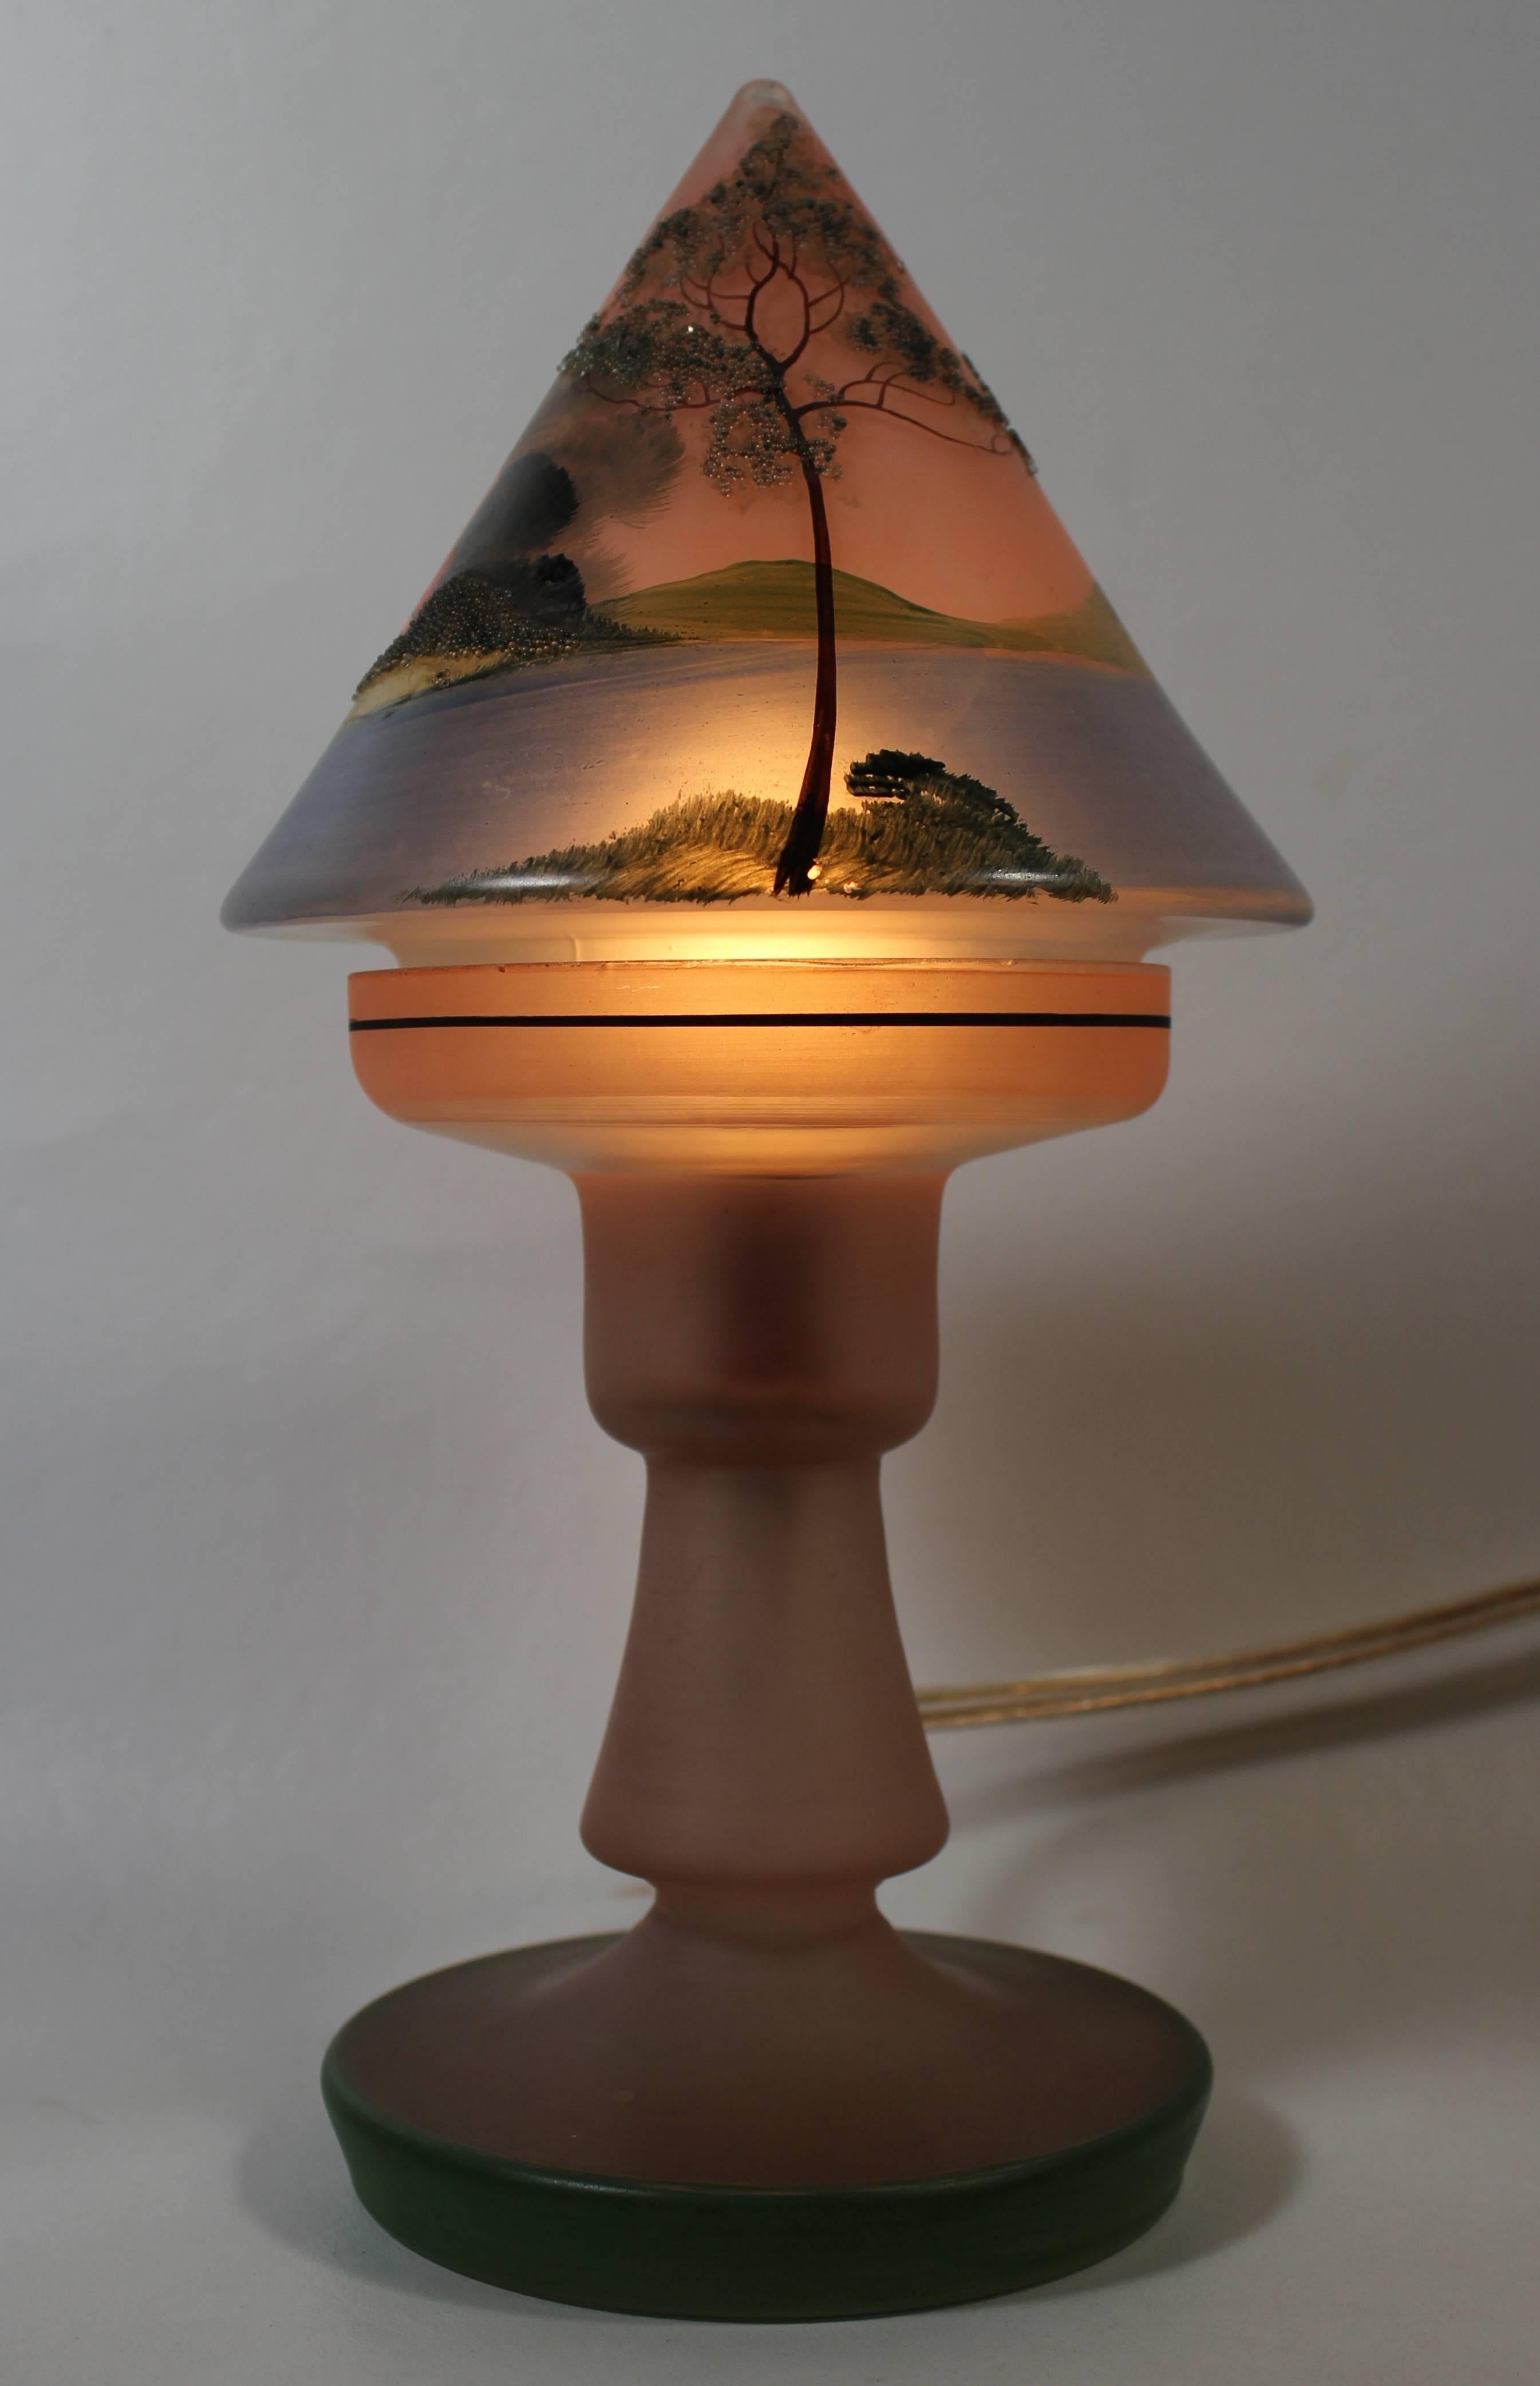 Art Deco bohemian hand-painted boudoir lamp.

Free shipping within the United States and Canada.